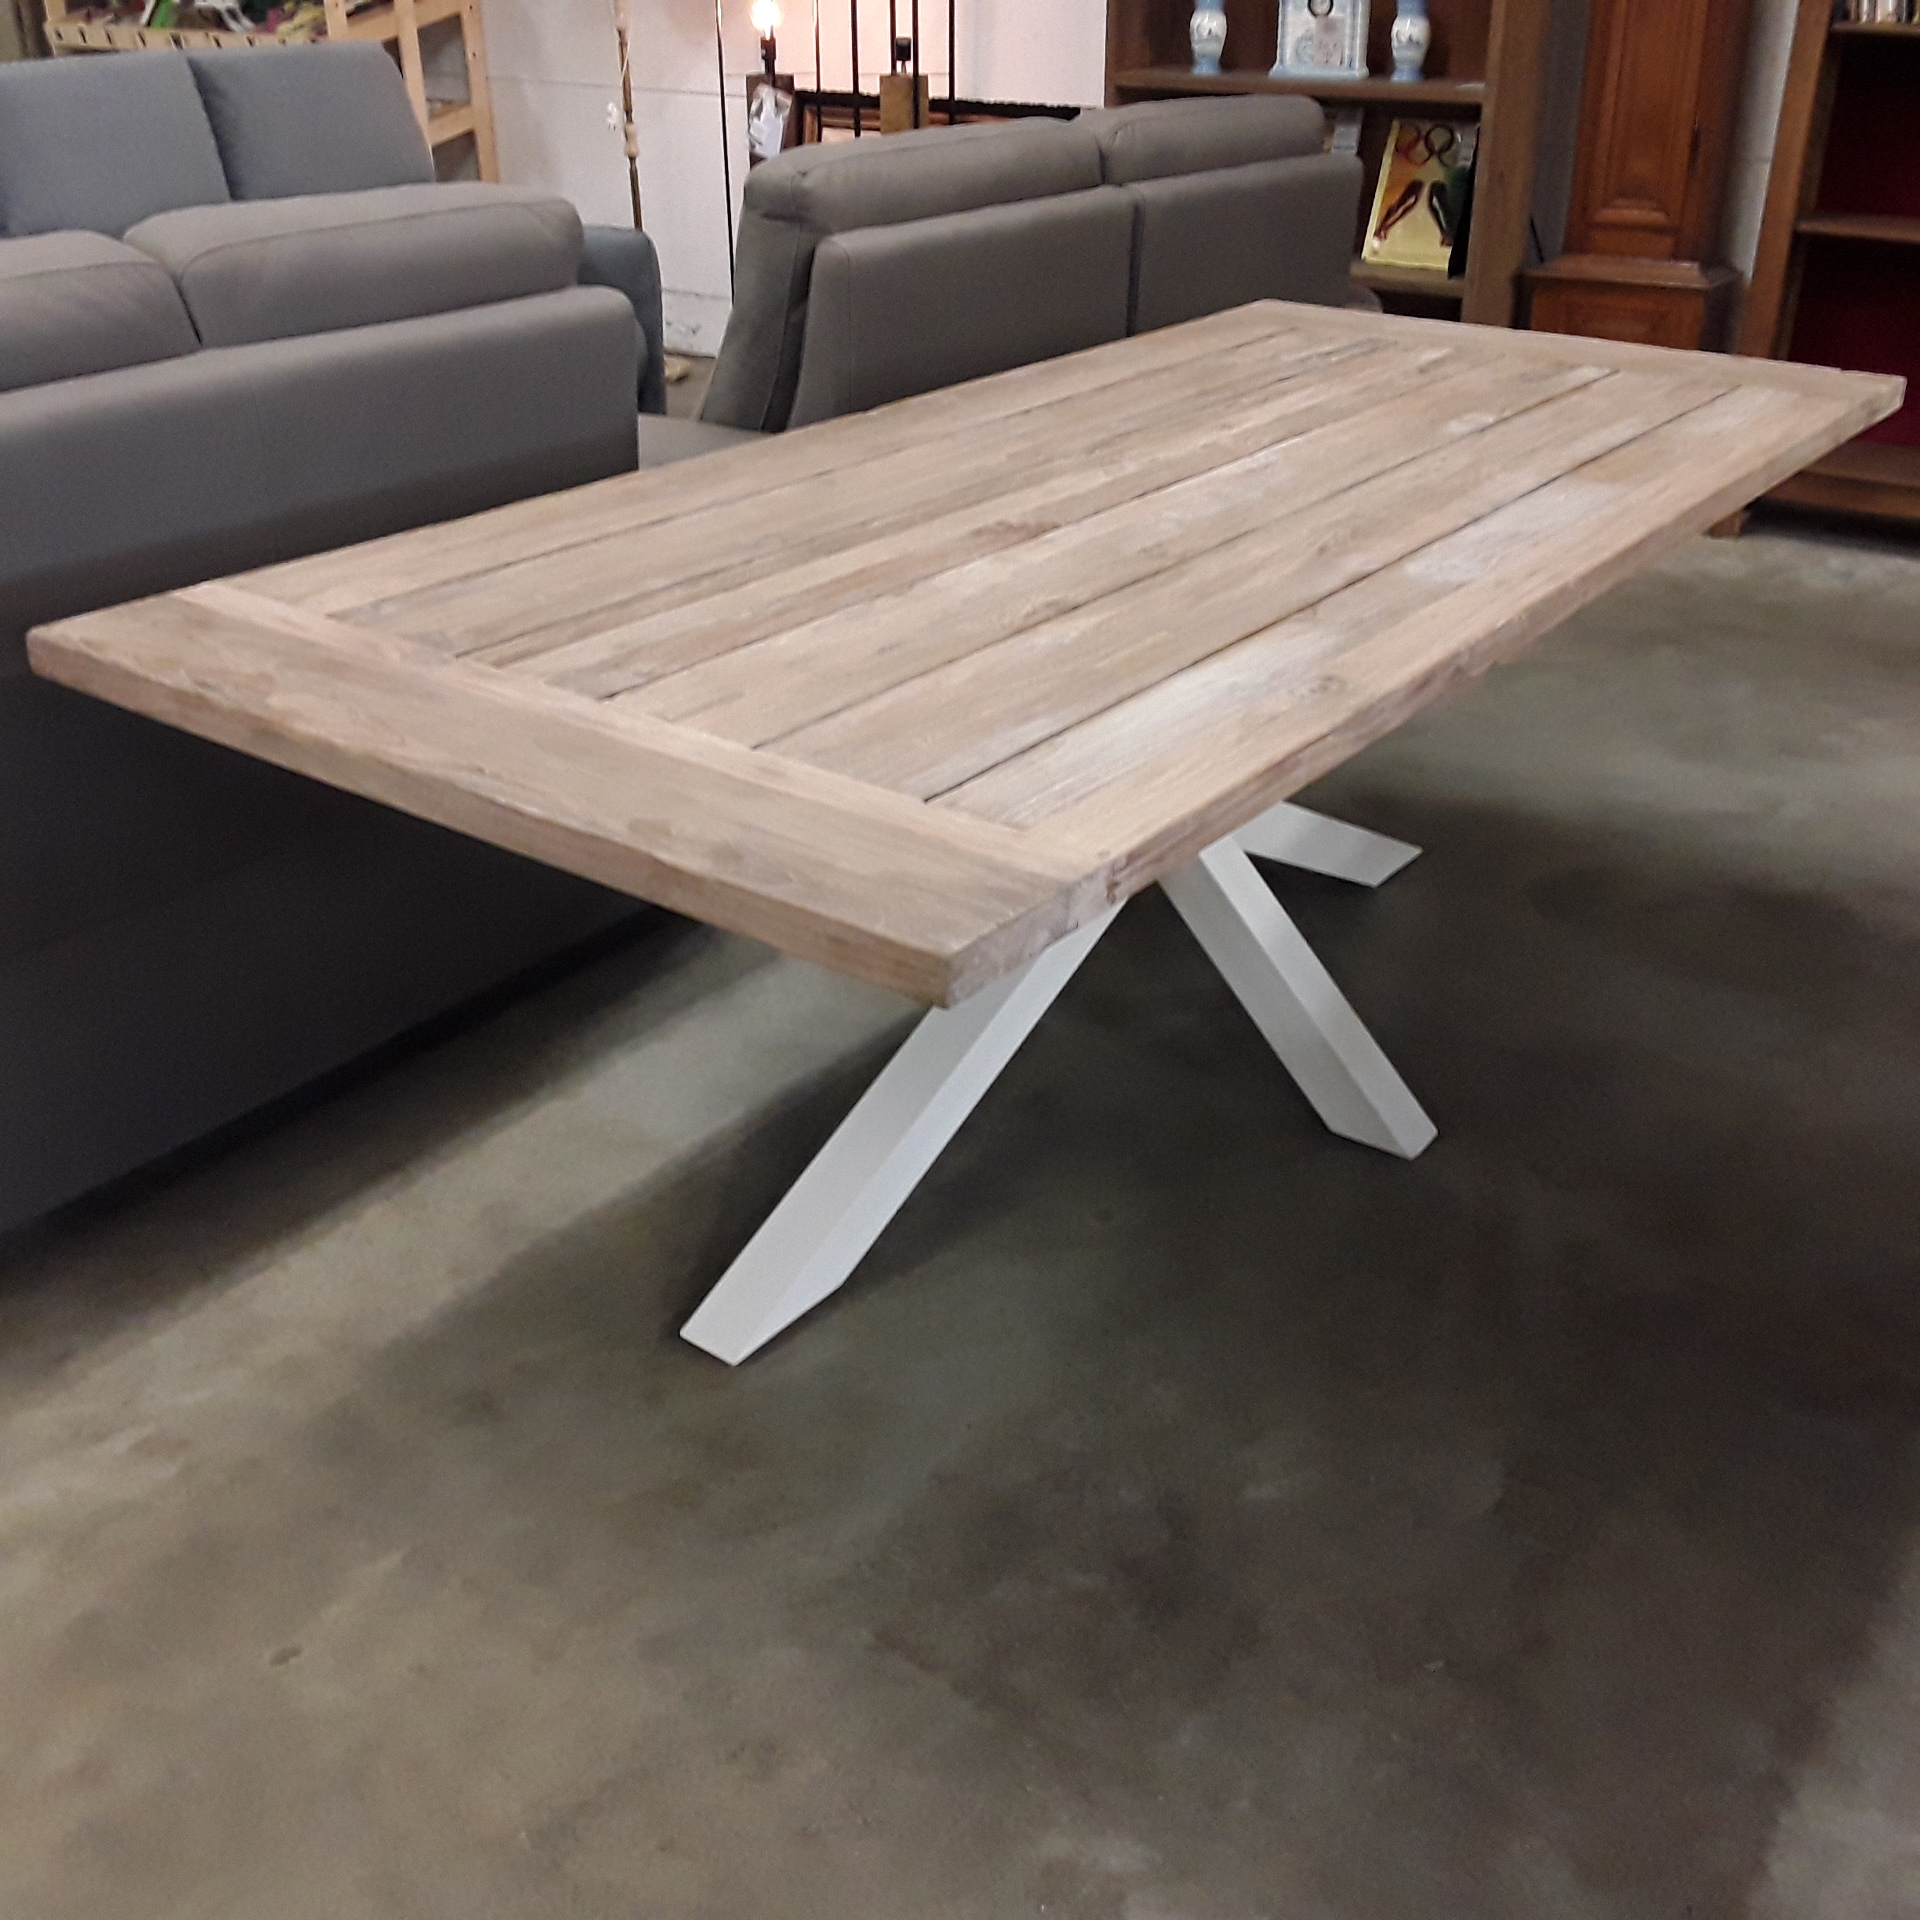 <p>Table ext jardin 100 x 220 Cm<br />Teck + pied alu blanc IS01C010<br />1 299,00 € T.T.C<br /><a href="/Article/4454?type=neuf" style="color:white;" target="_blank">Lien vers l&#39;article</a></p>